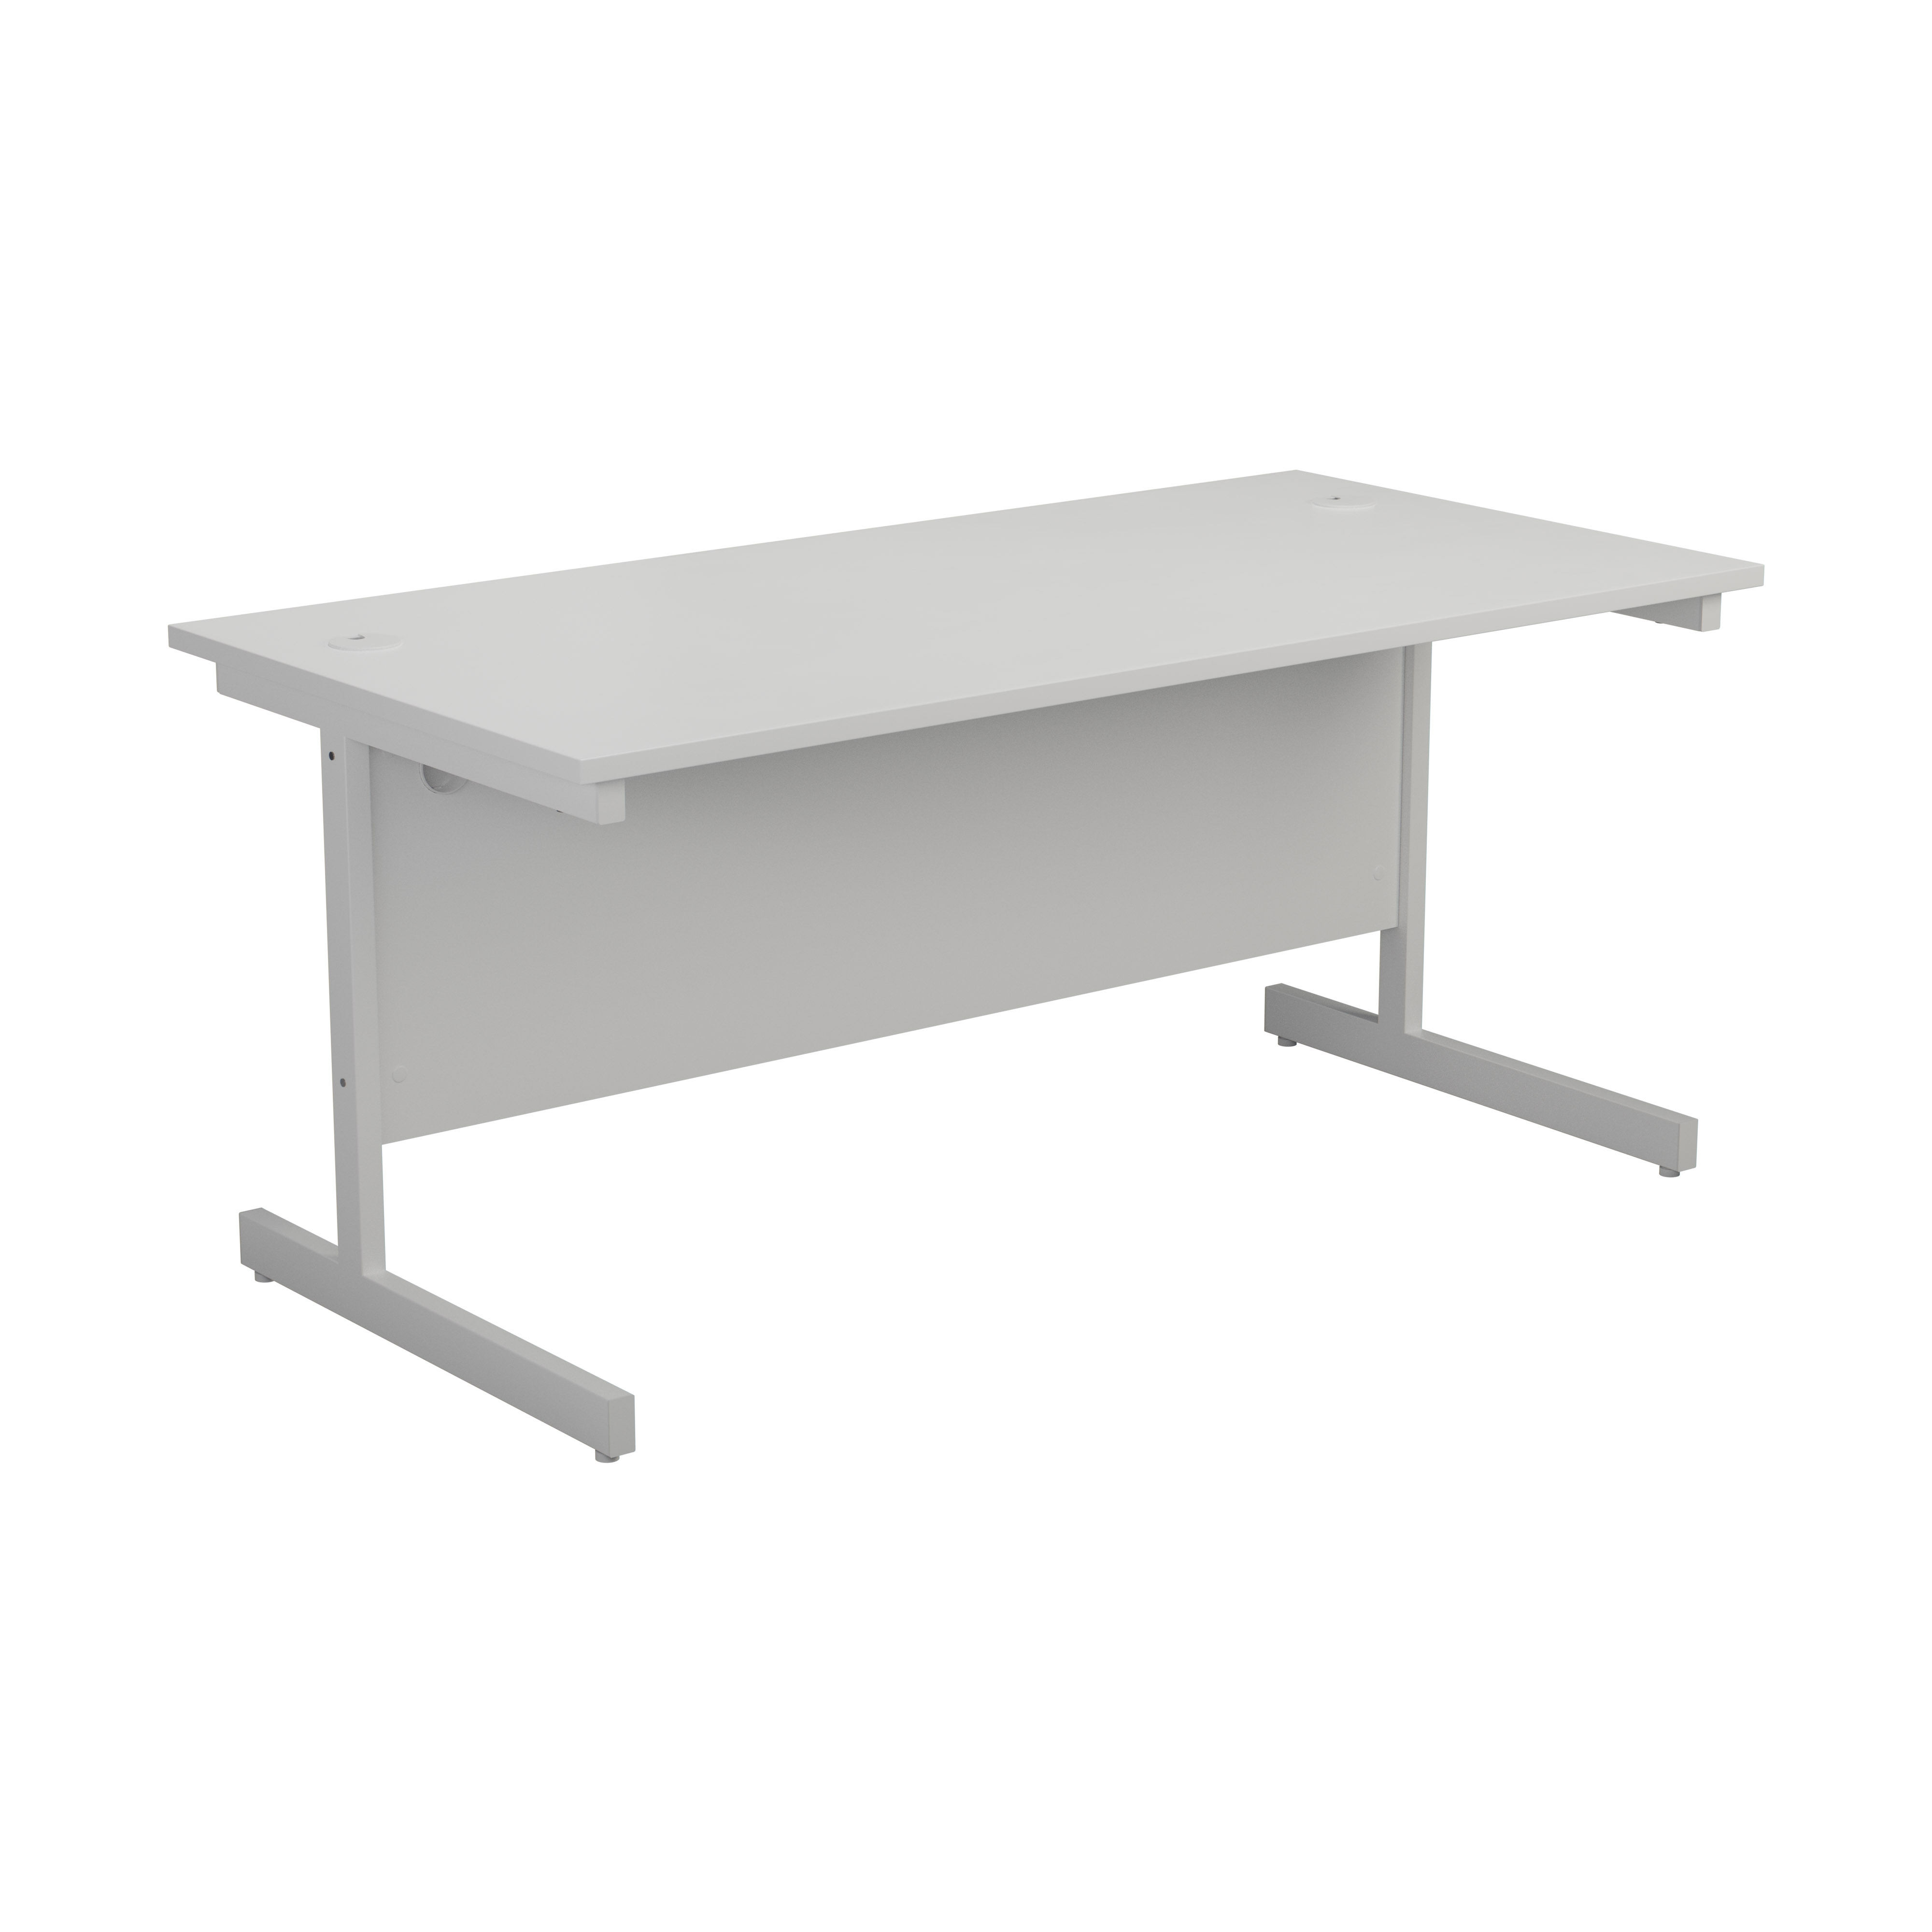 One Cantilever 1600 Rectangular Cantilever Workstation - White Top White Legs